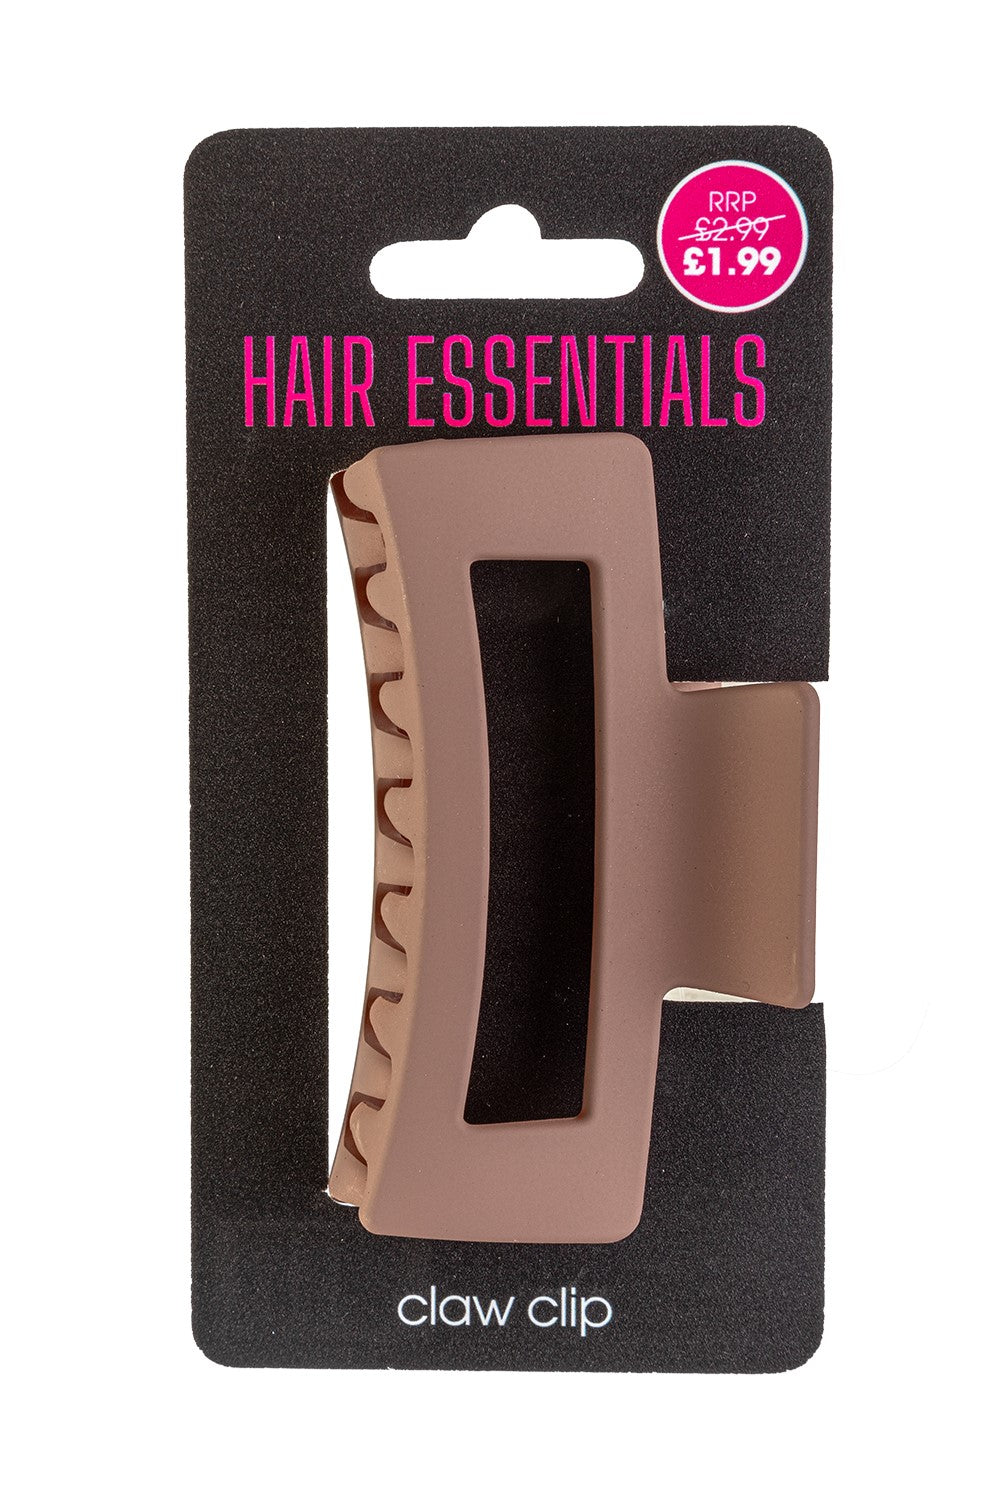 Beauty Outlet Square Claw Clip Chocolate